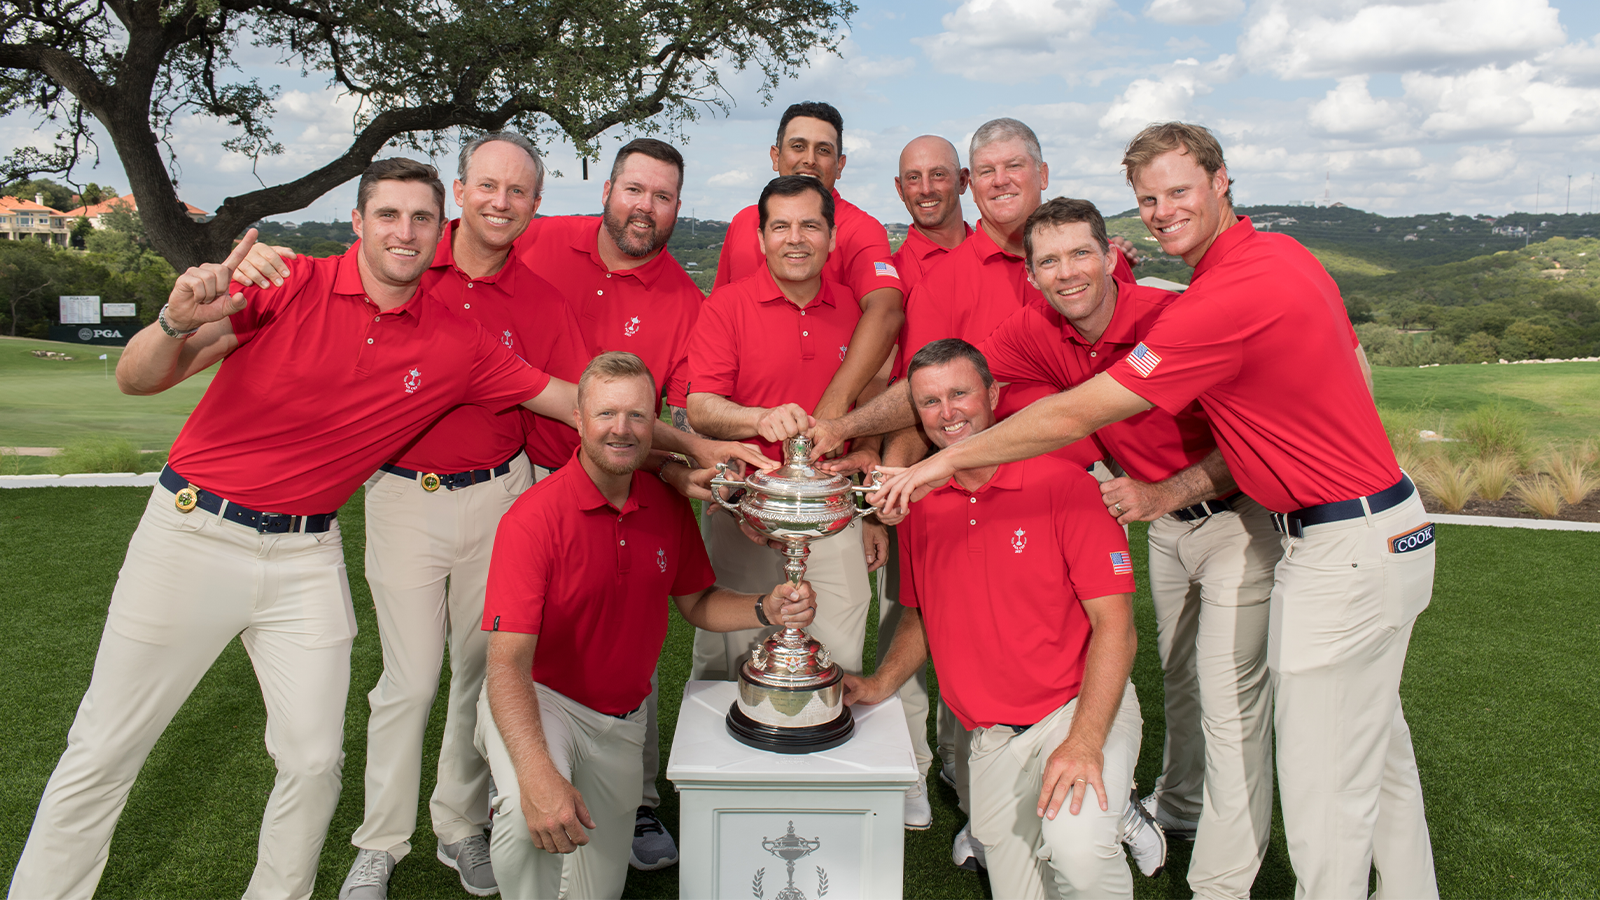 The United States team after winning the 29th PGA Cup held at the Omni Barton Creek Resort & Spa on September 29, 2019 in Austin, Texas. (Photo by Montana Pritchard/PGA of America)